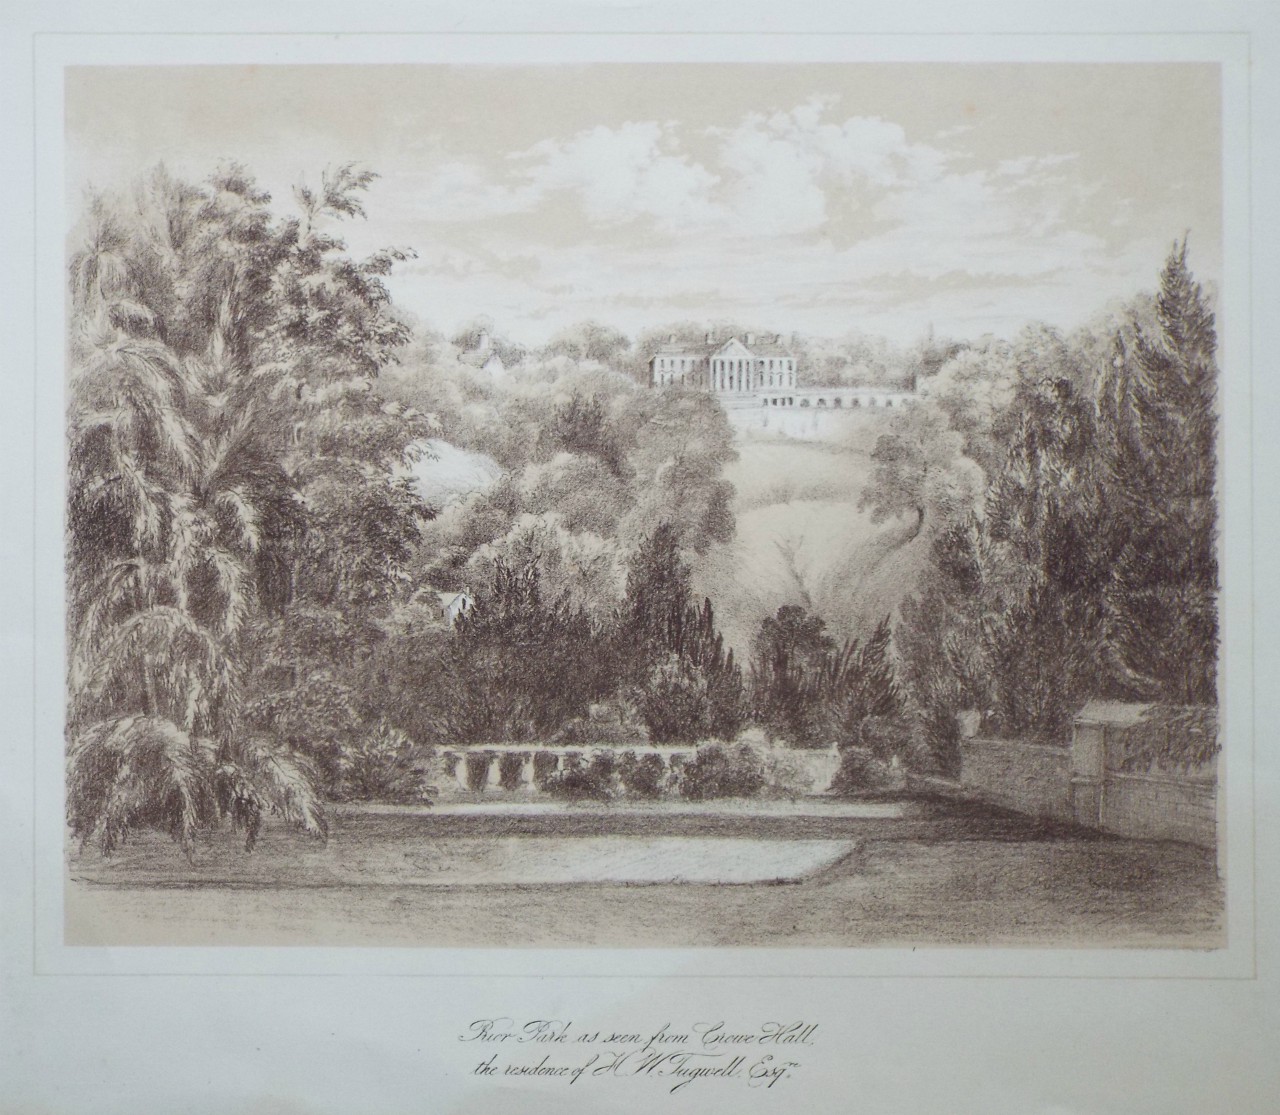 Lithograph - Prior Park as seen from Crowe Hall, the residence of W. Tugwell, Esqr.